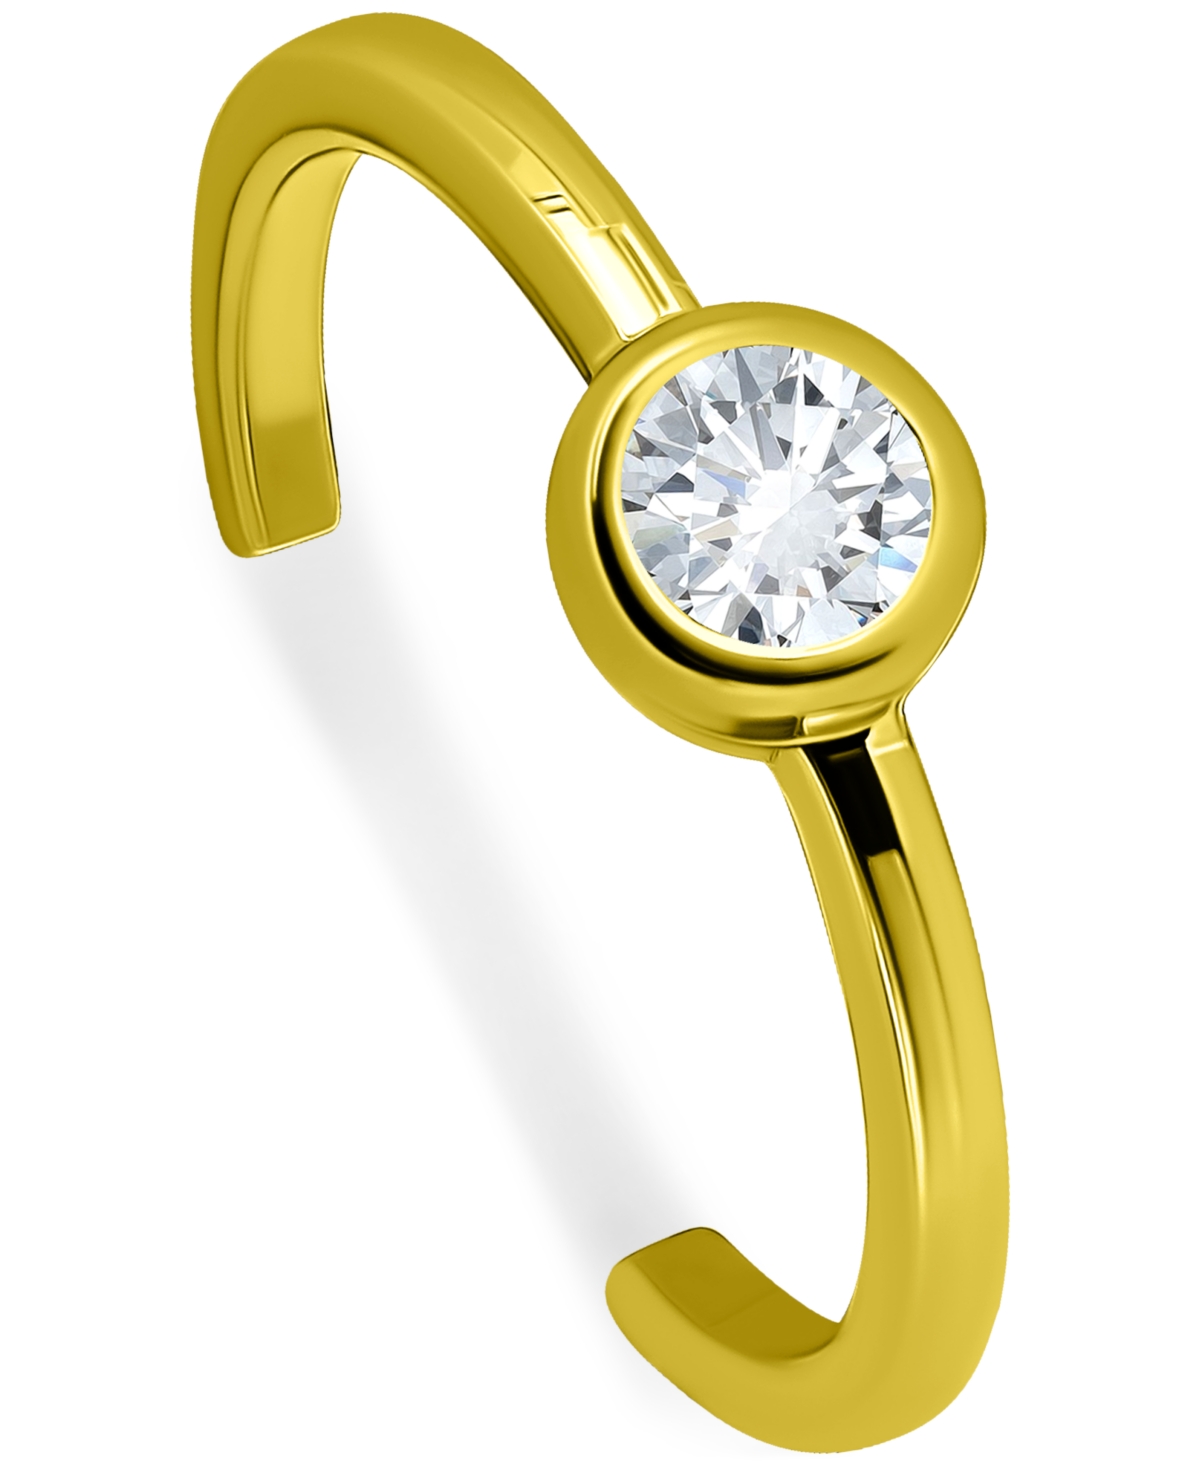 Cubic Zirconia Bezel Polished Toe Ring, Created for Macy's - Gold